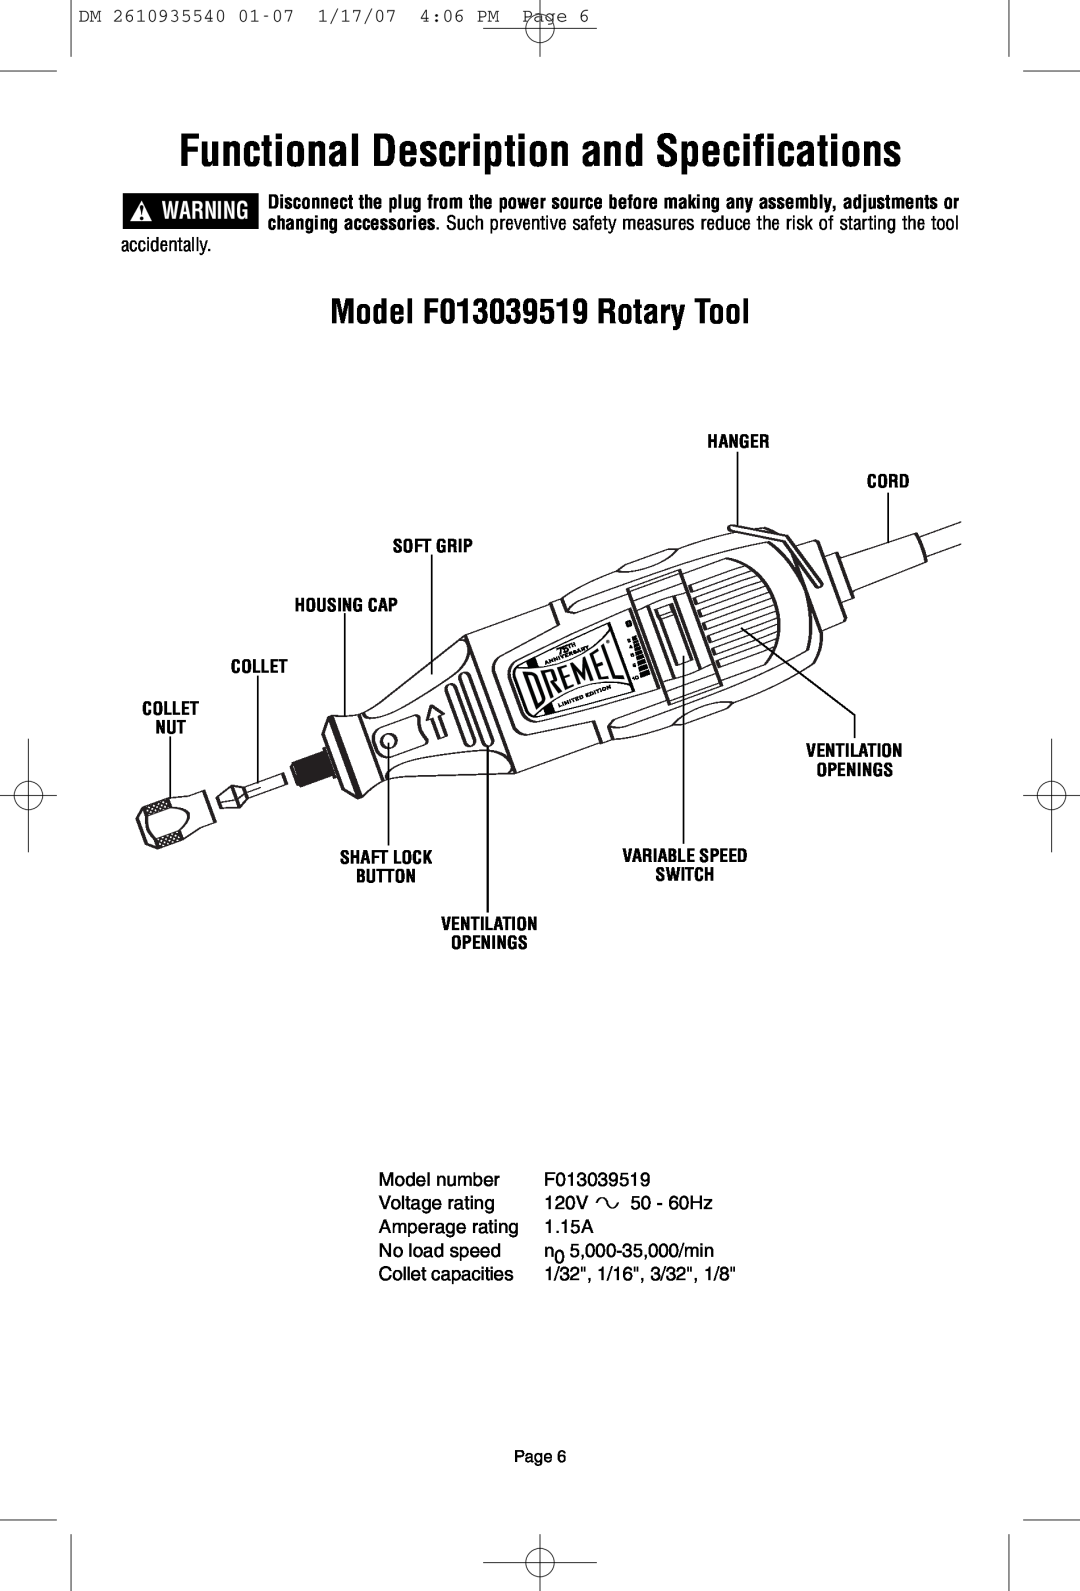 Dremel owner manual Functional Description and Specifications, Model F013039519 Rotary Tool, accidentally 